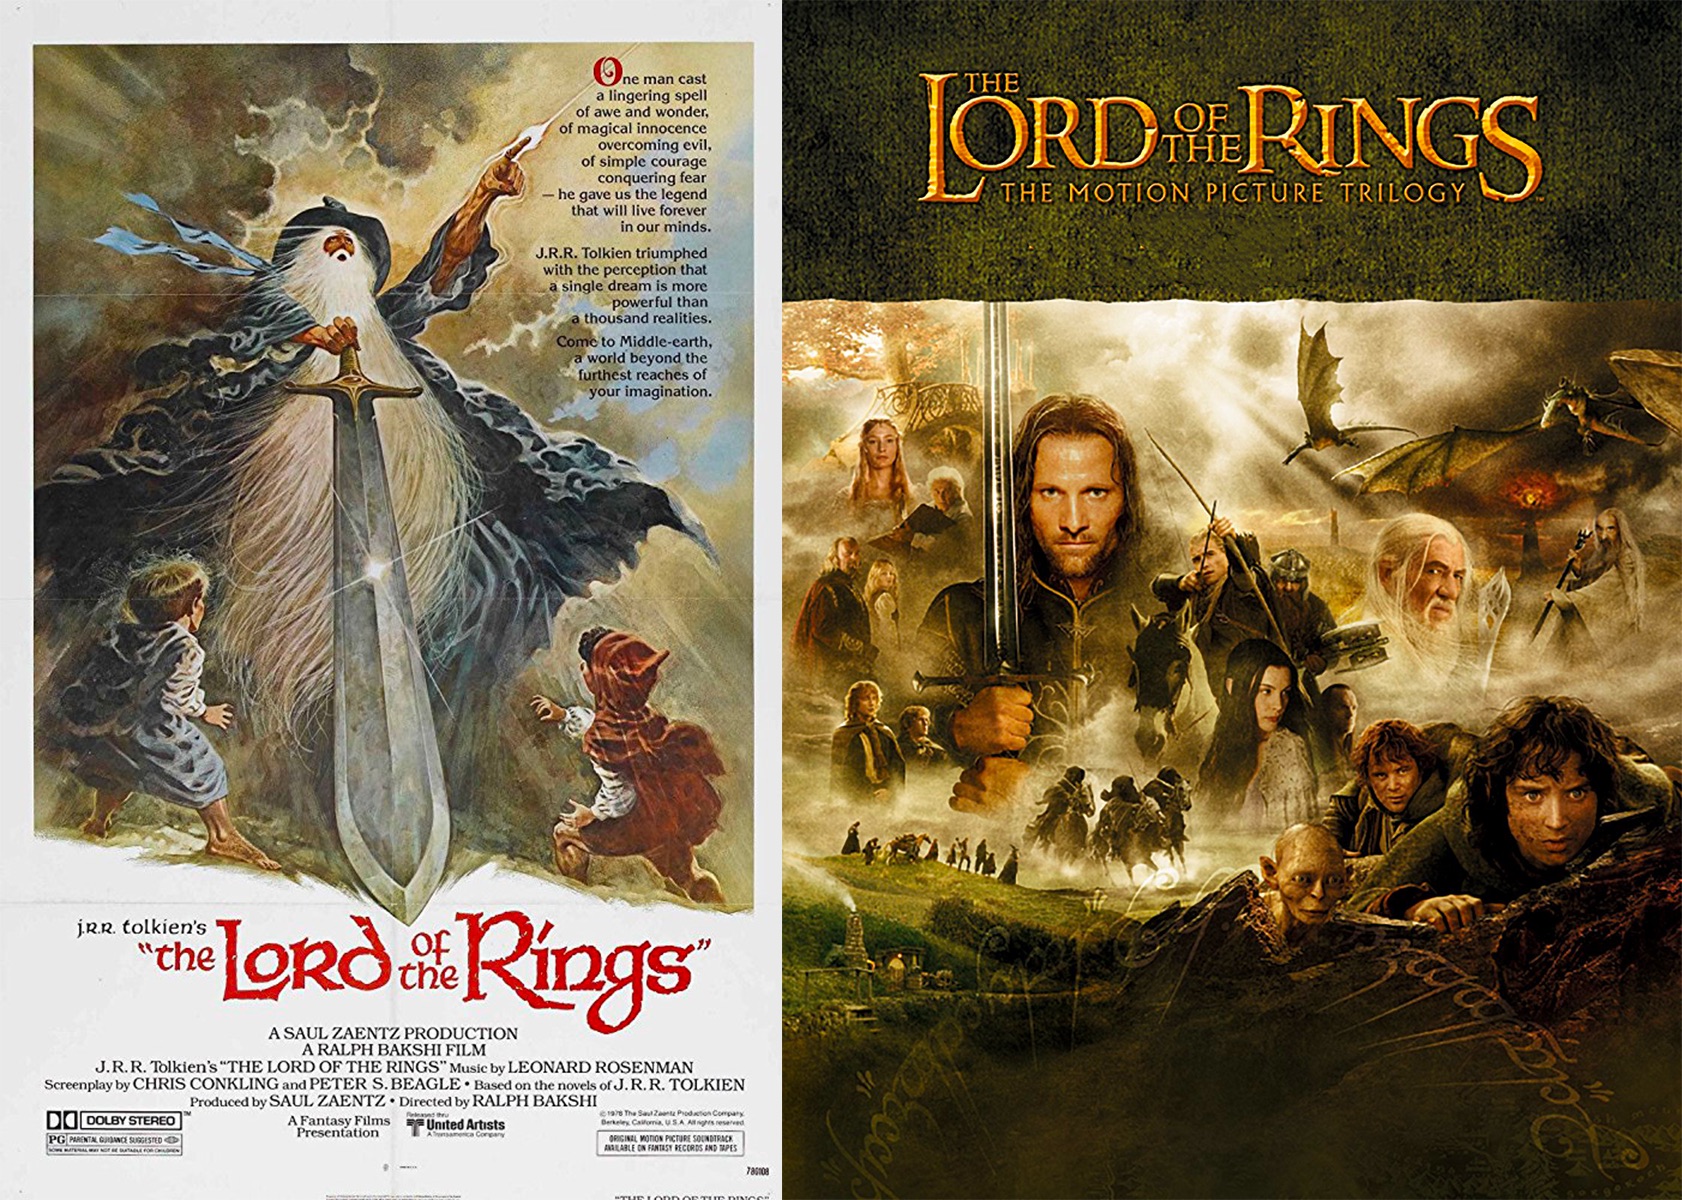 The Lord of the Rings: The Return of the King (Original Motion